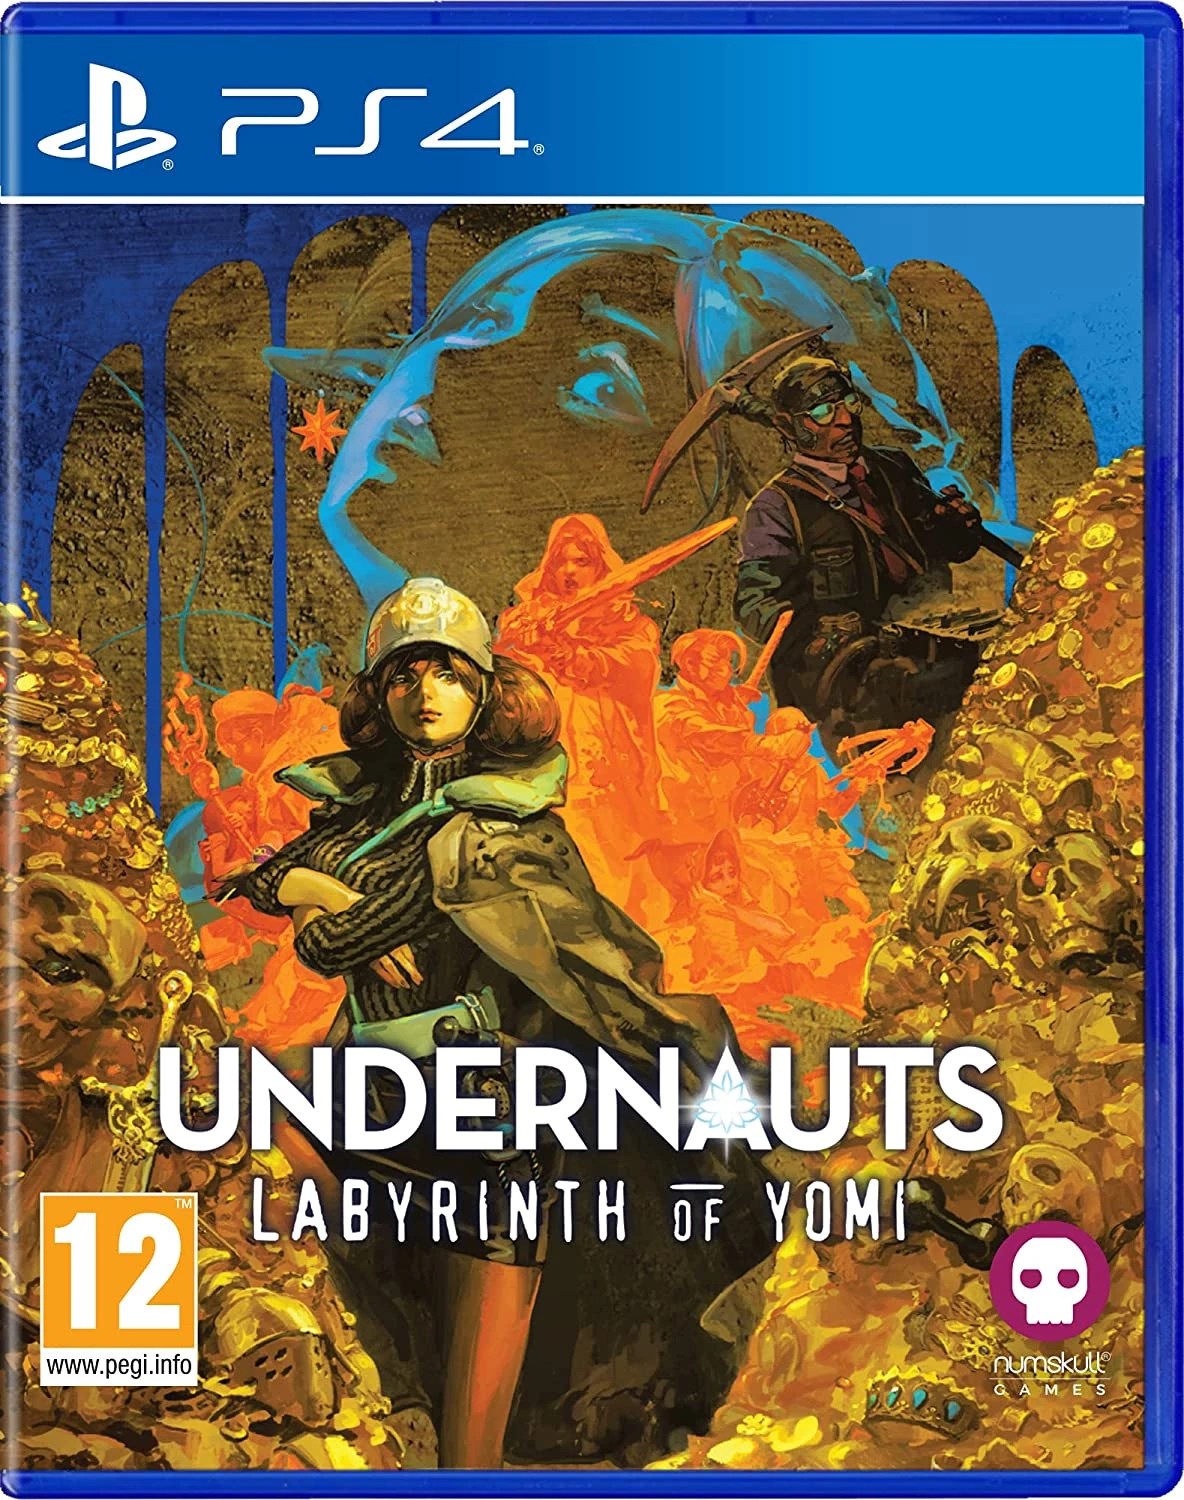 Undernauts: Labyrinth of Yomi (PS4), Numskull Games